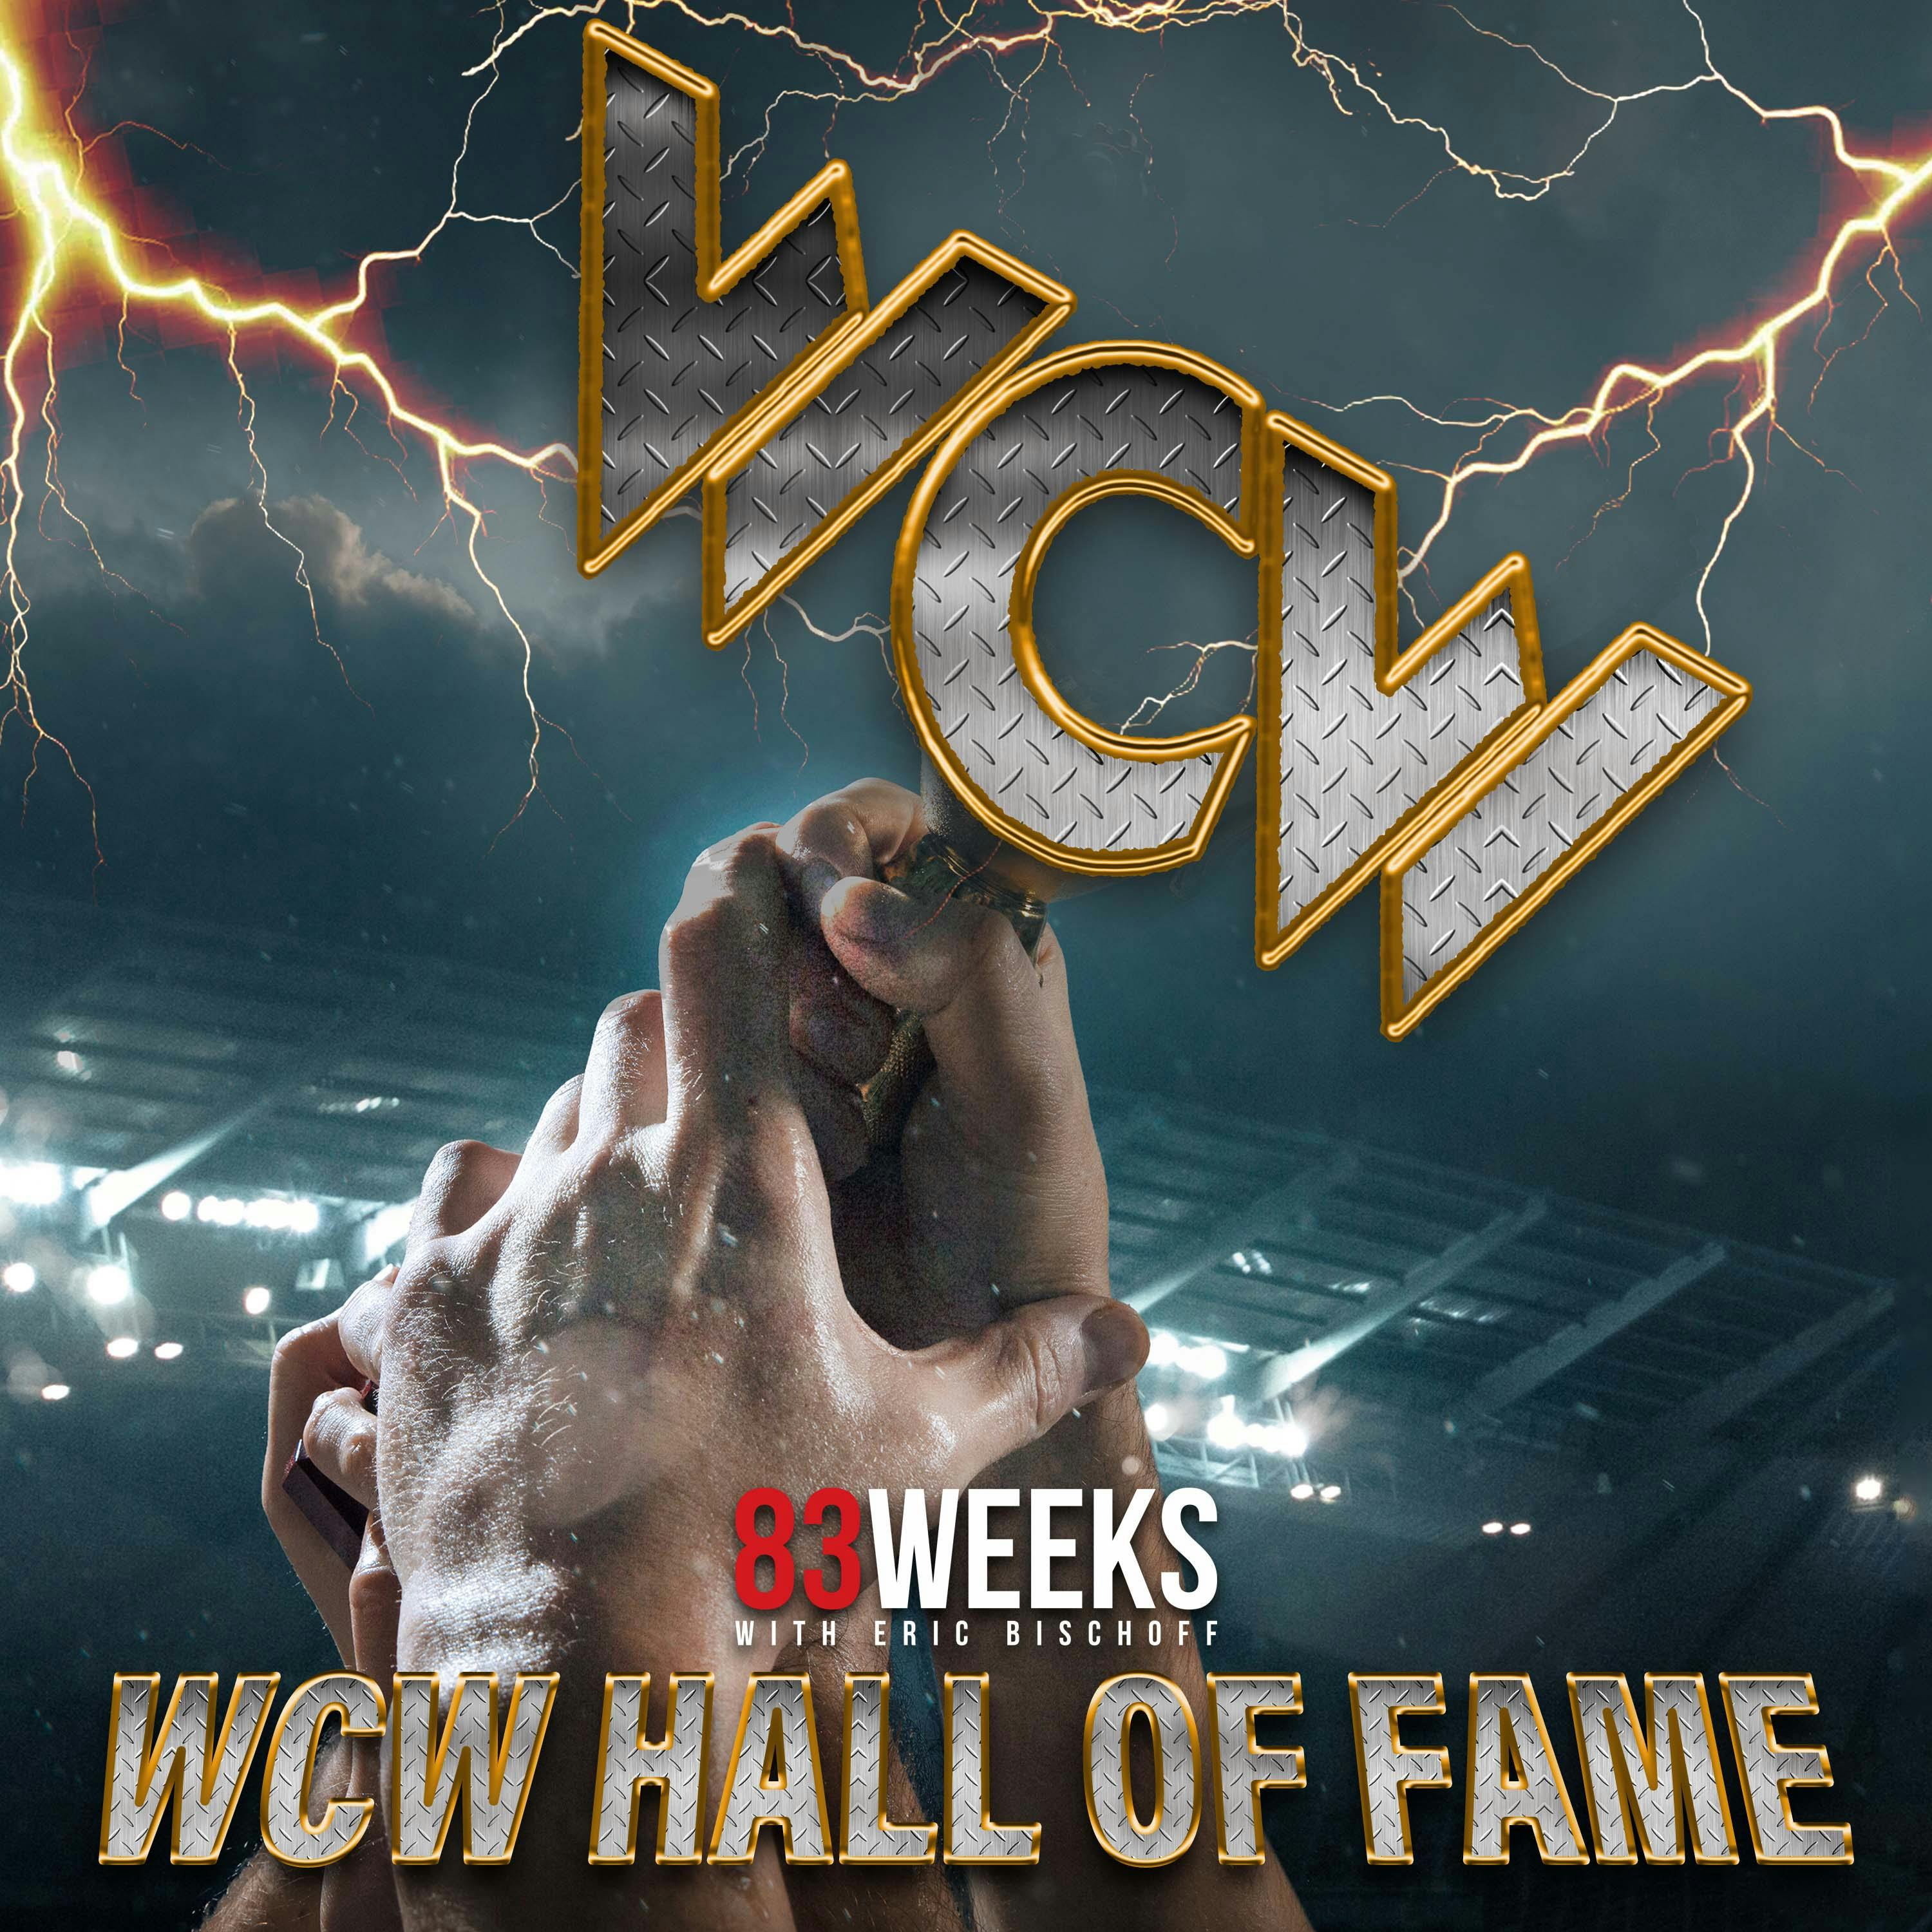 Episode 320: WCW Hall Of Fame